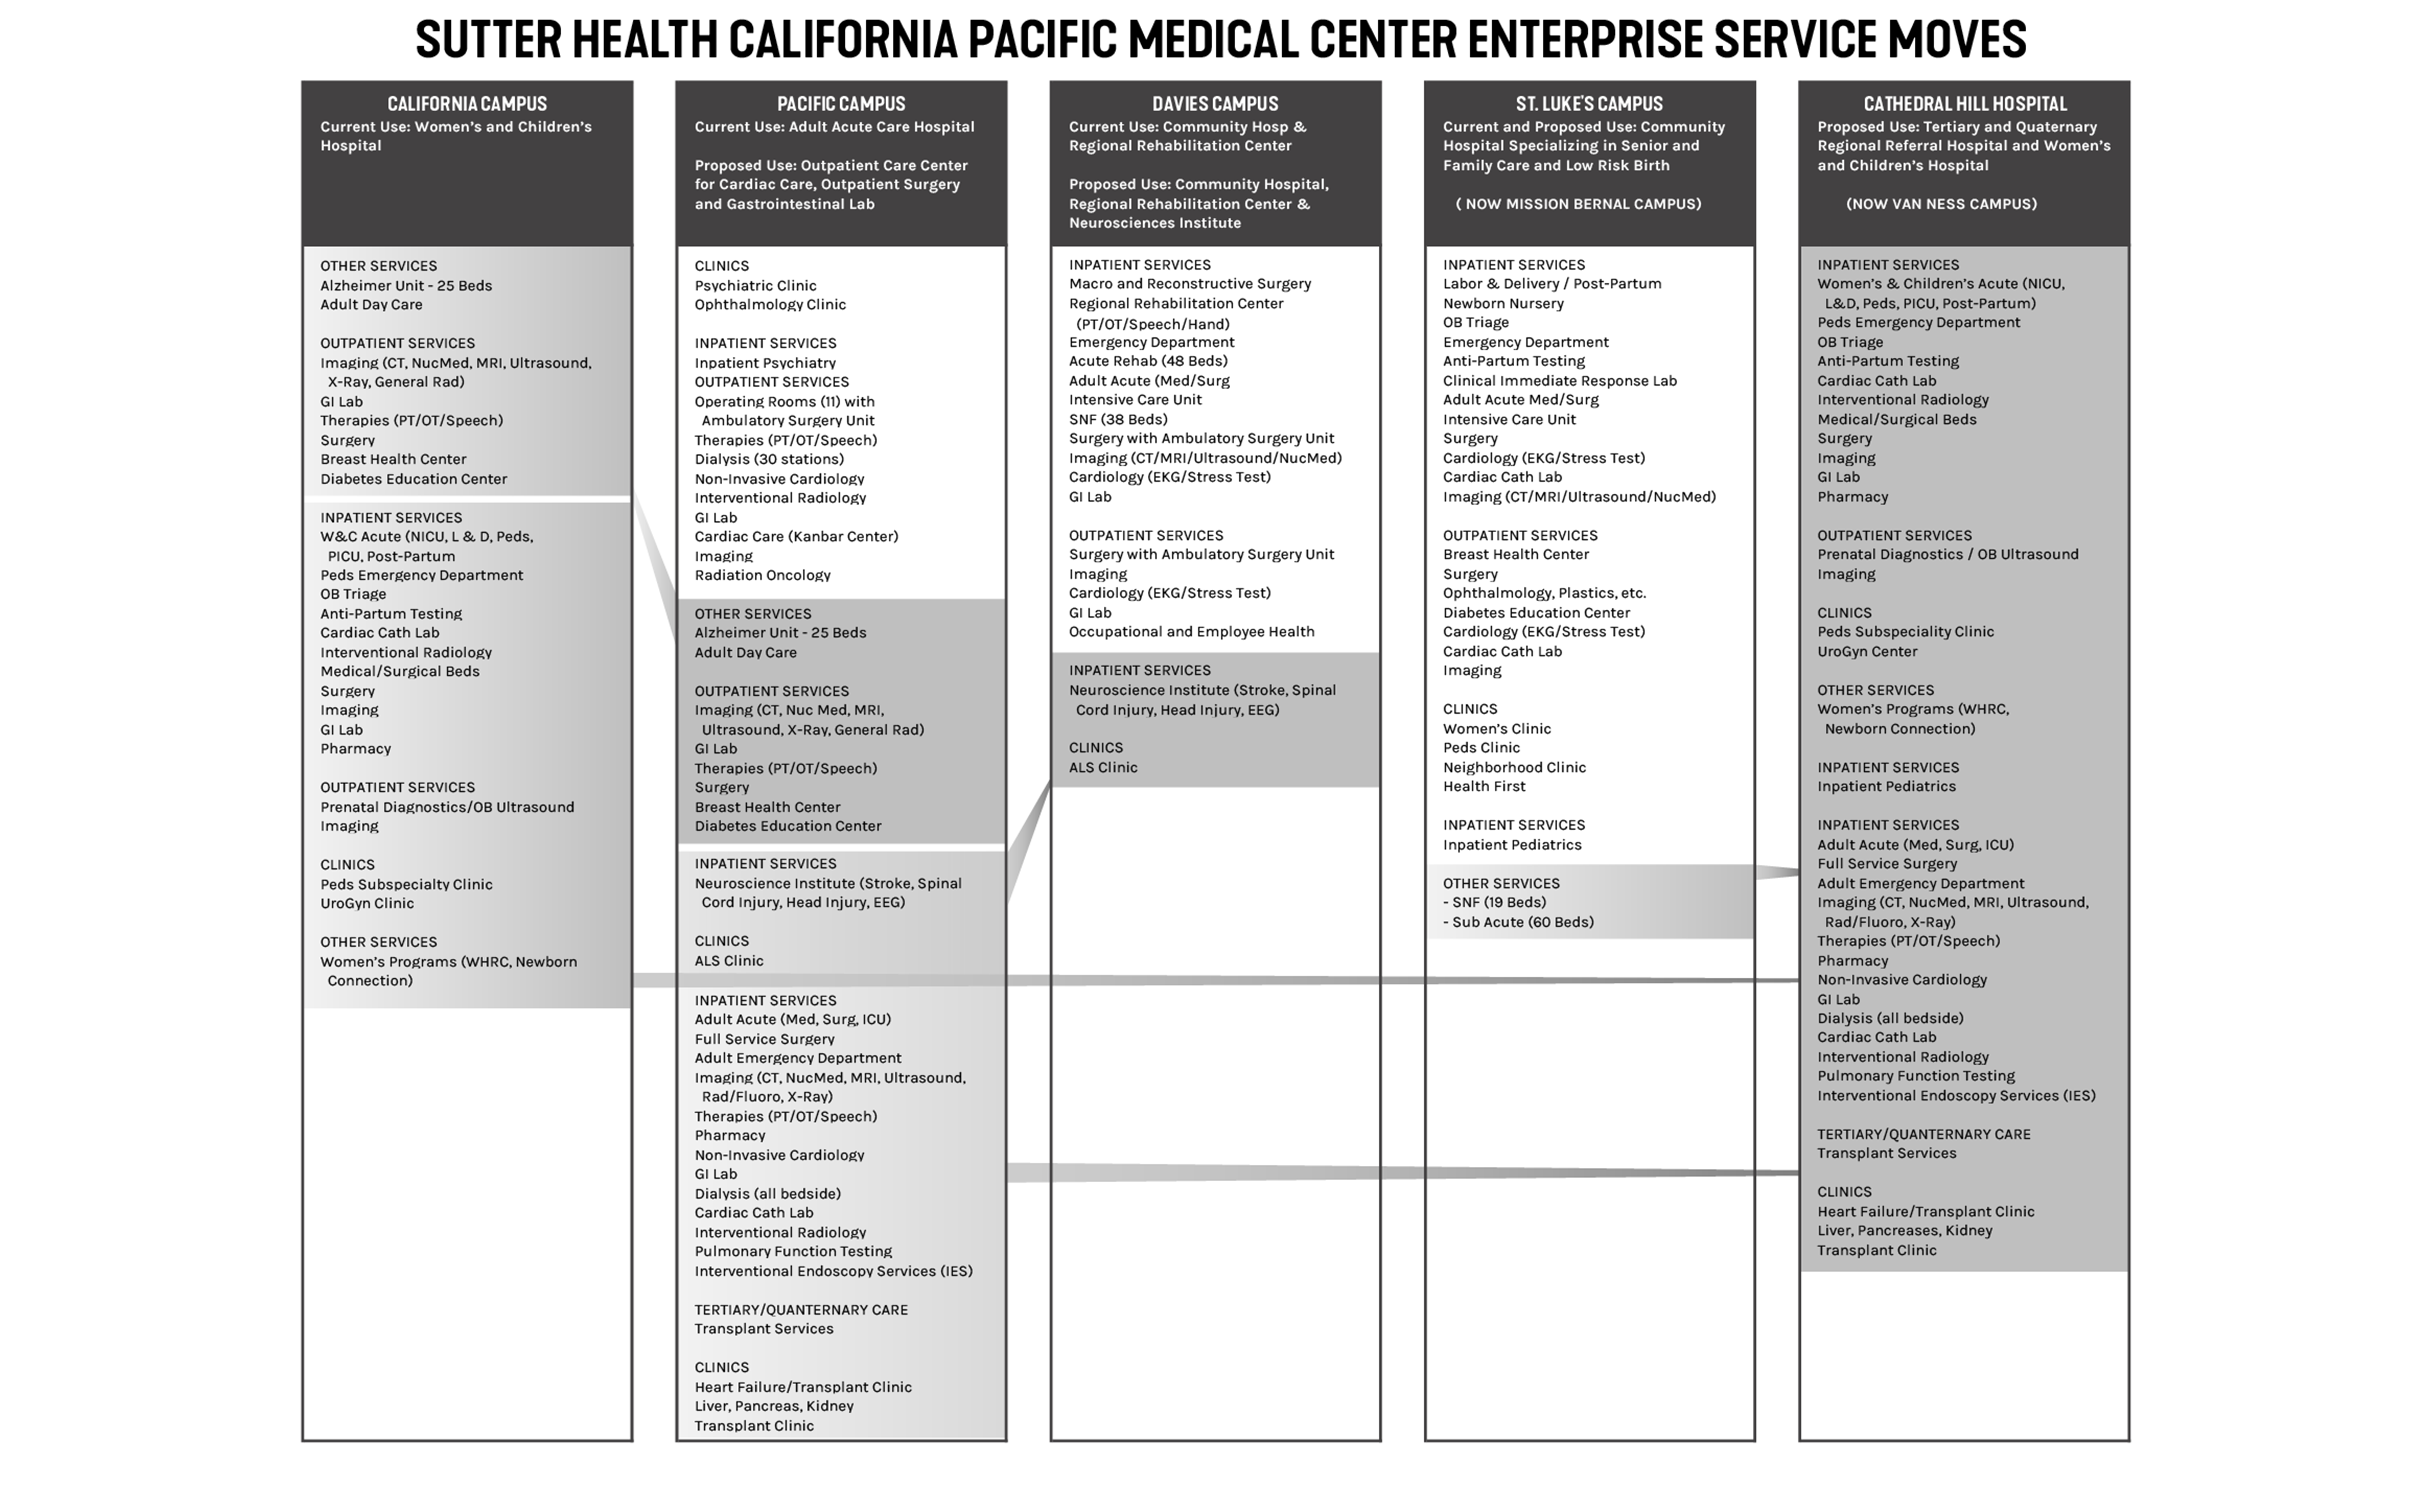 CPMC Health Strategy SmithGroup Planning 